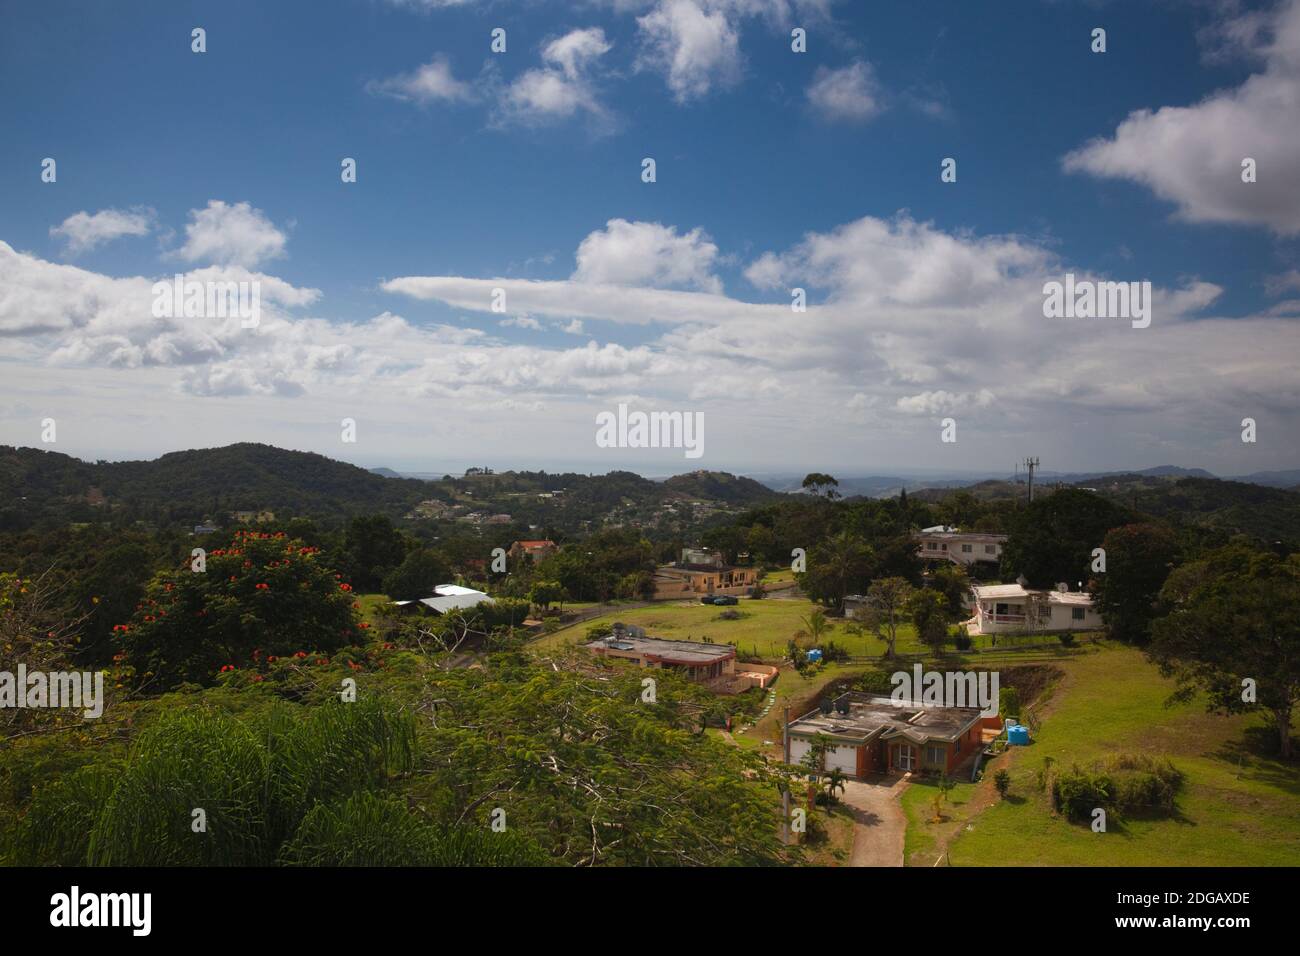 High angle view of a town from the Mirador La Piedra Degetau on the Ruta Panoramica, Aibonito, Central Mountains, Puerto Rico Stock Photo